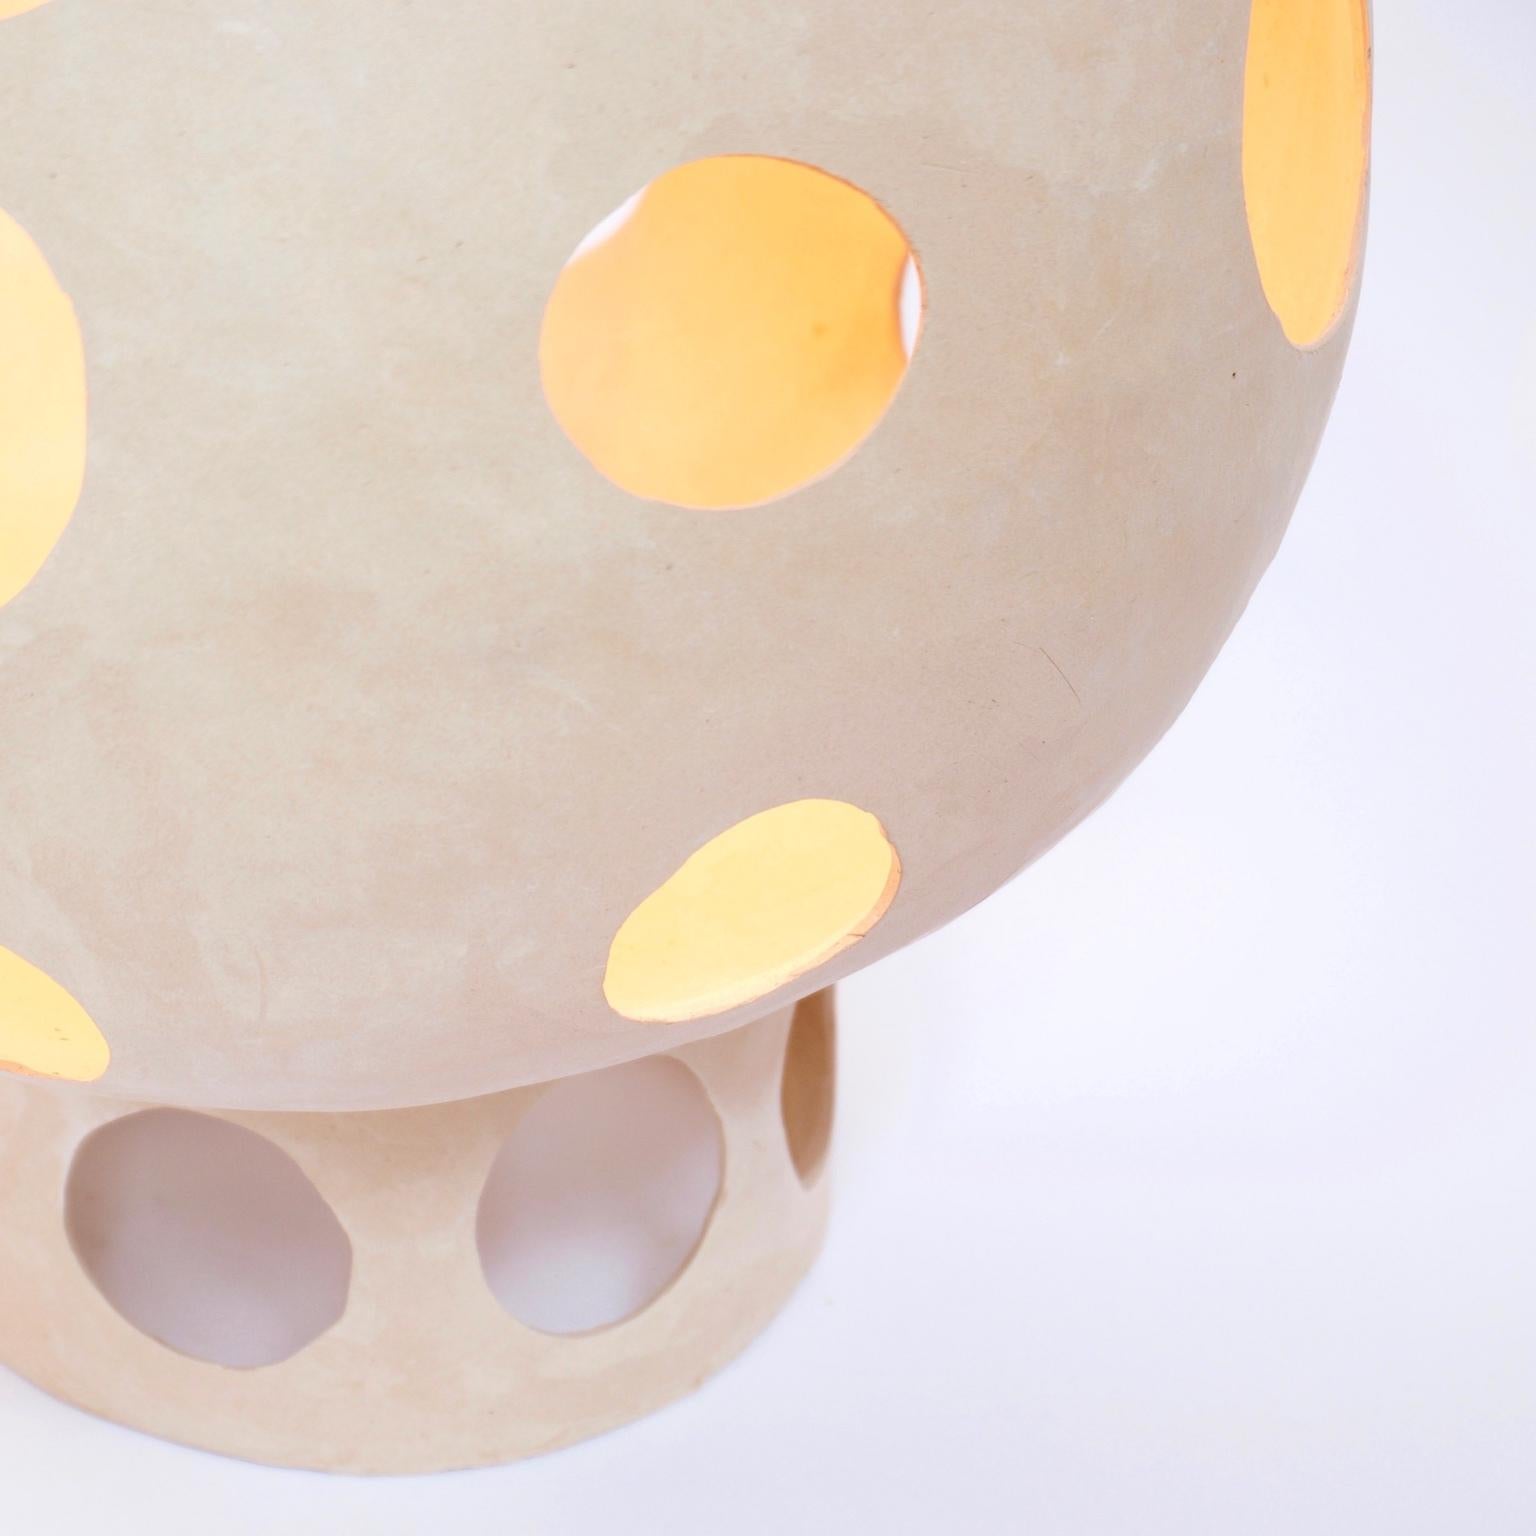 Modern Contemporary Sculptural Hand-Built Ceramic Dome Table Lamp in Light Earth Tone